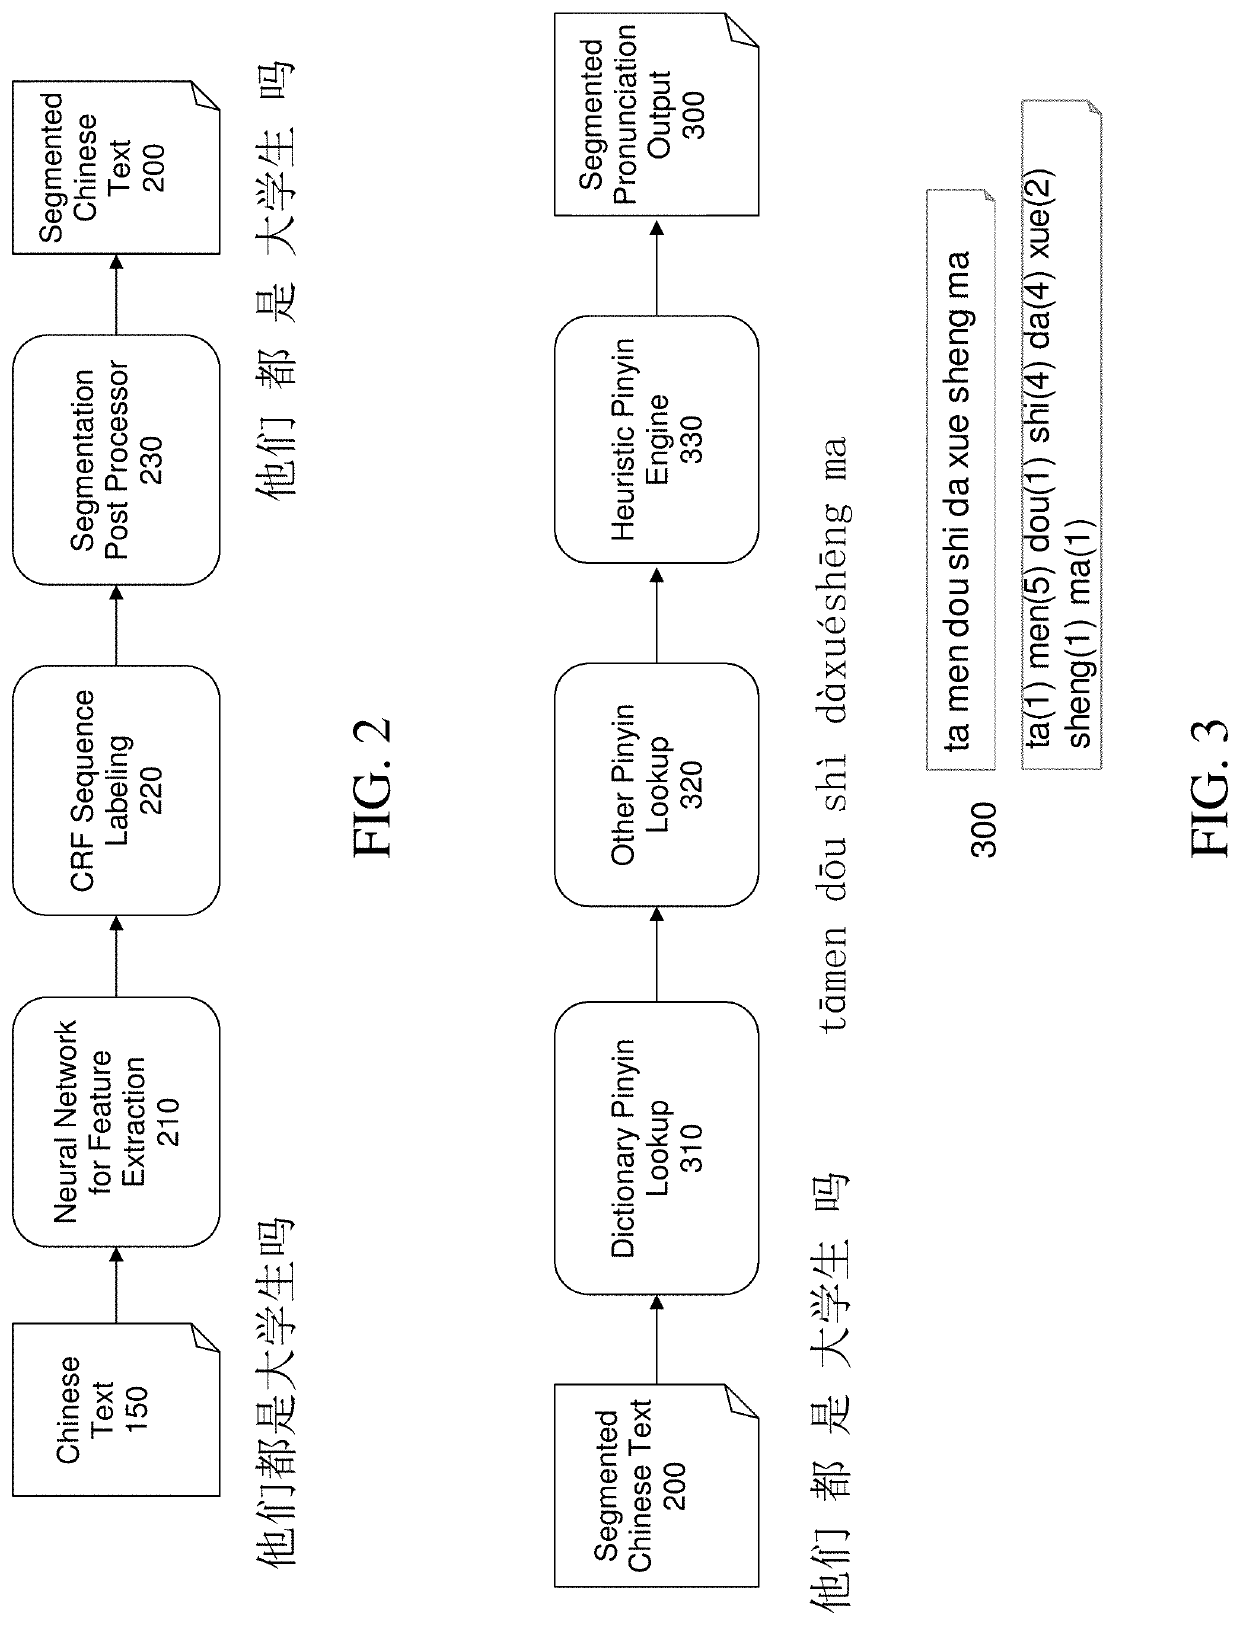 Systems and Methods for Comprehensive Chinese Speech Scoring and Diagnosis